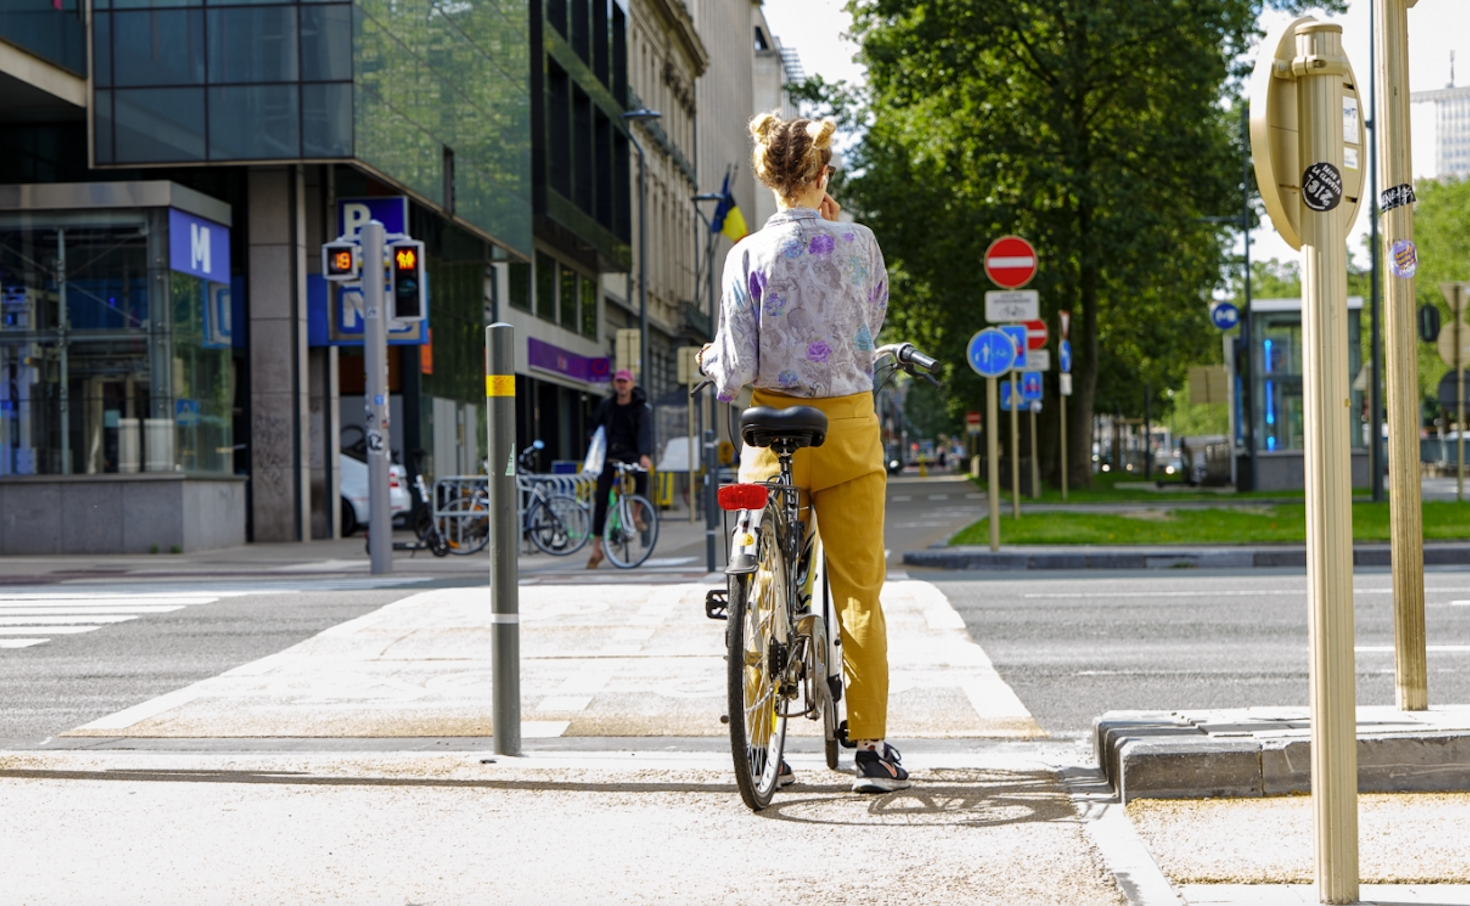 Two-colored traffic lights to improve safety for cyclists and pedestrians